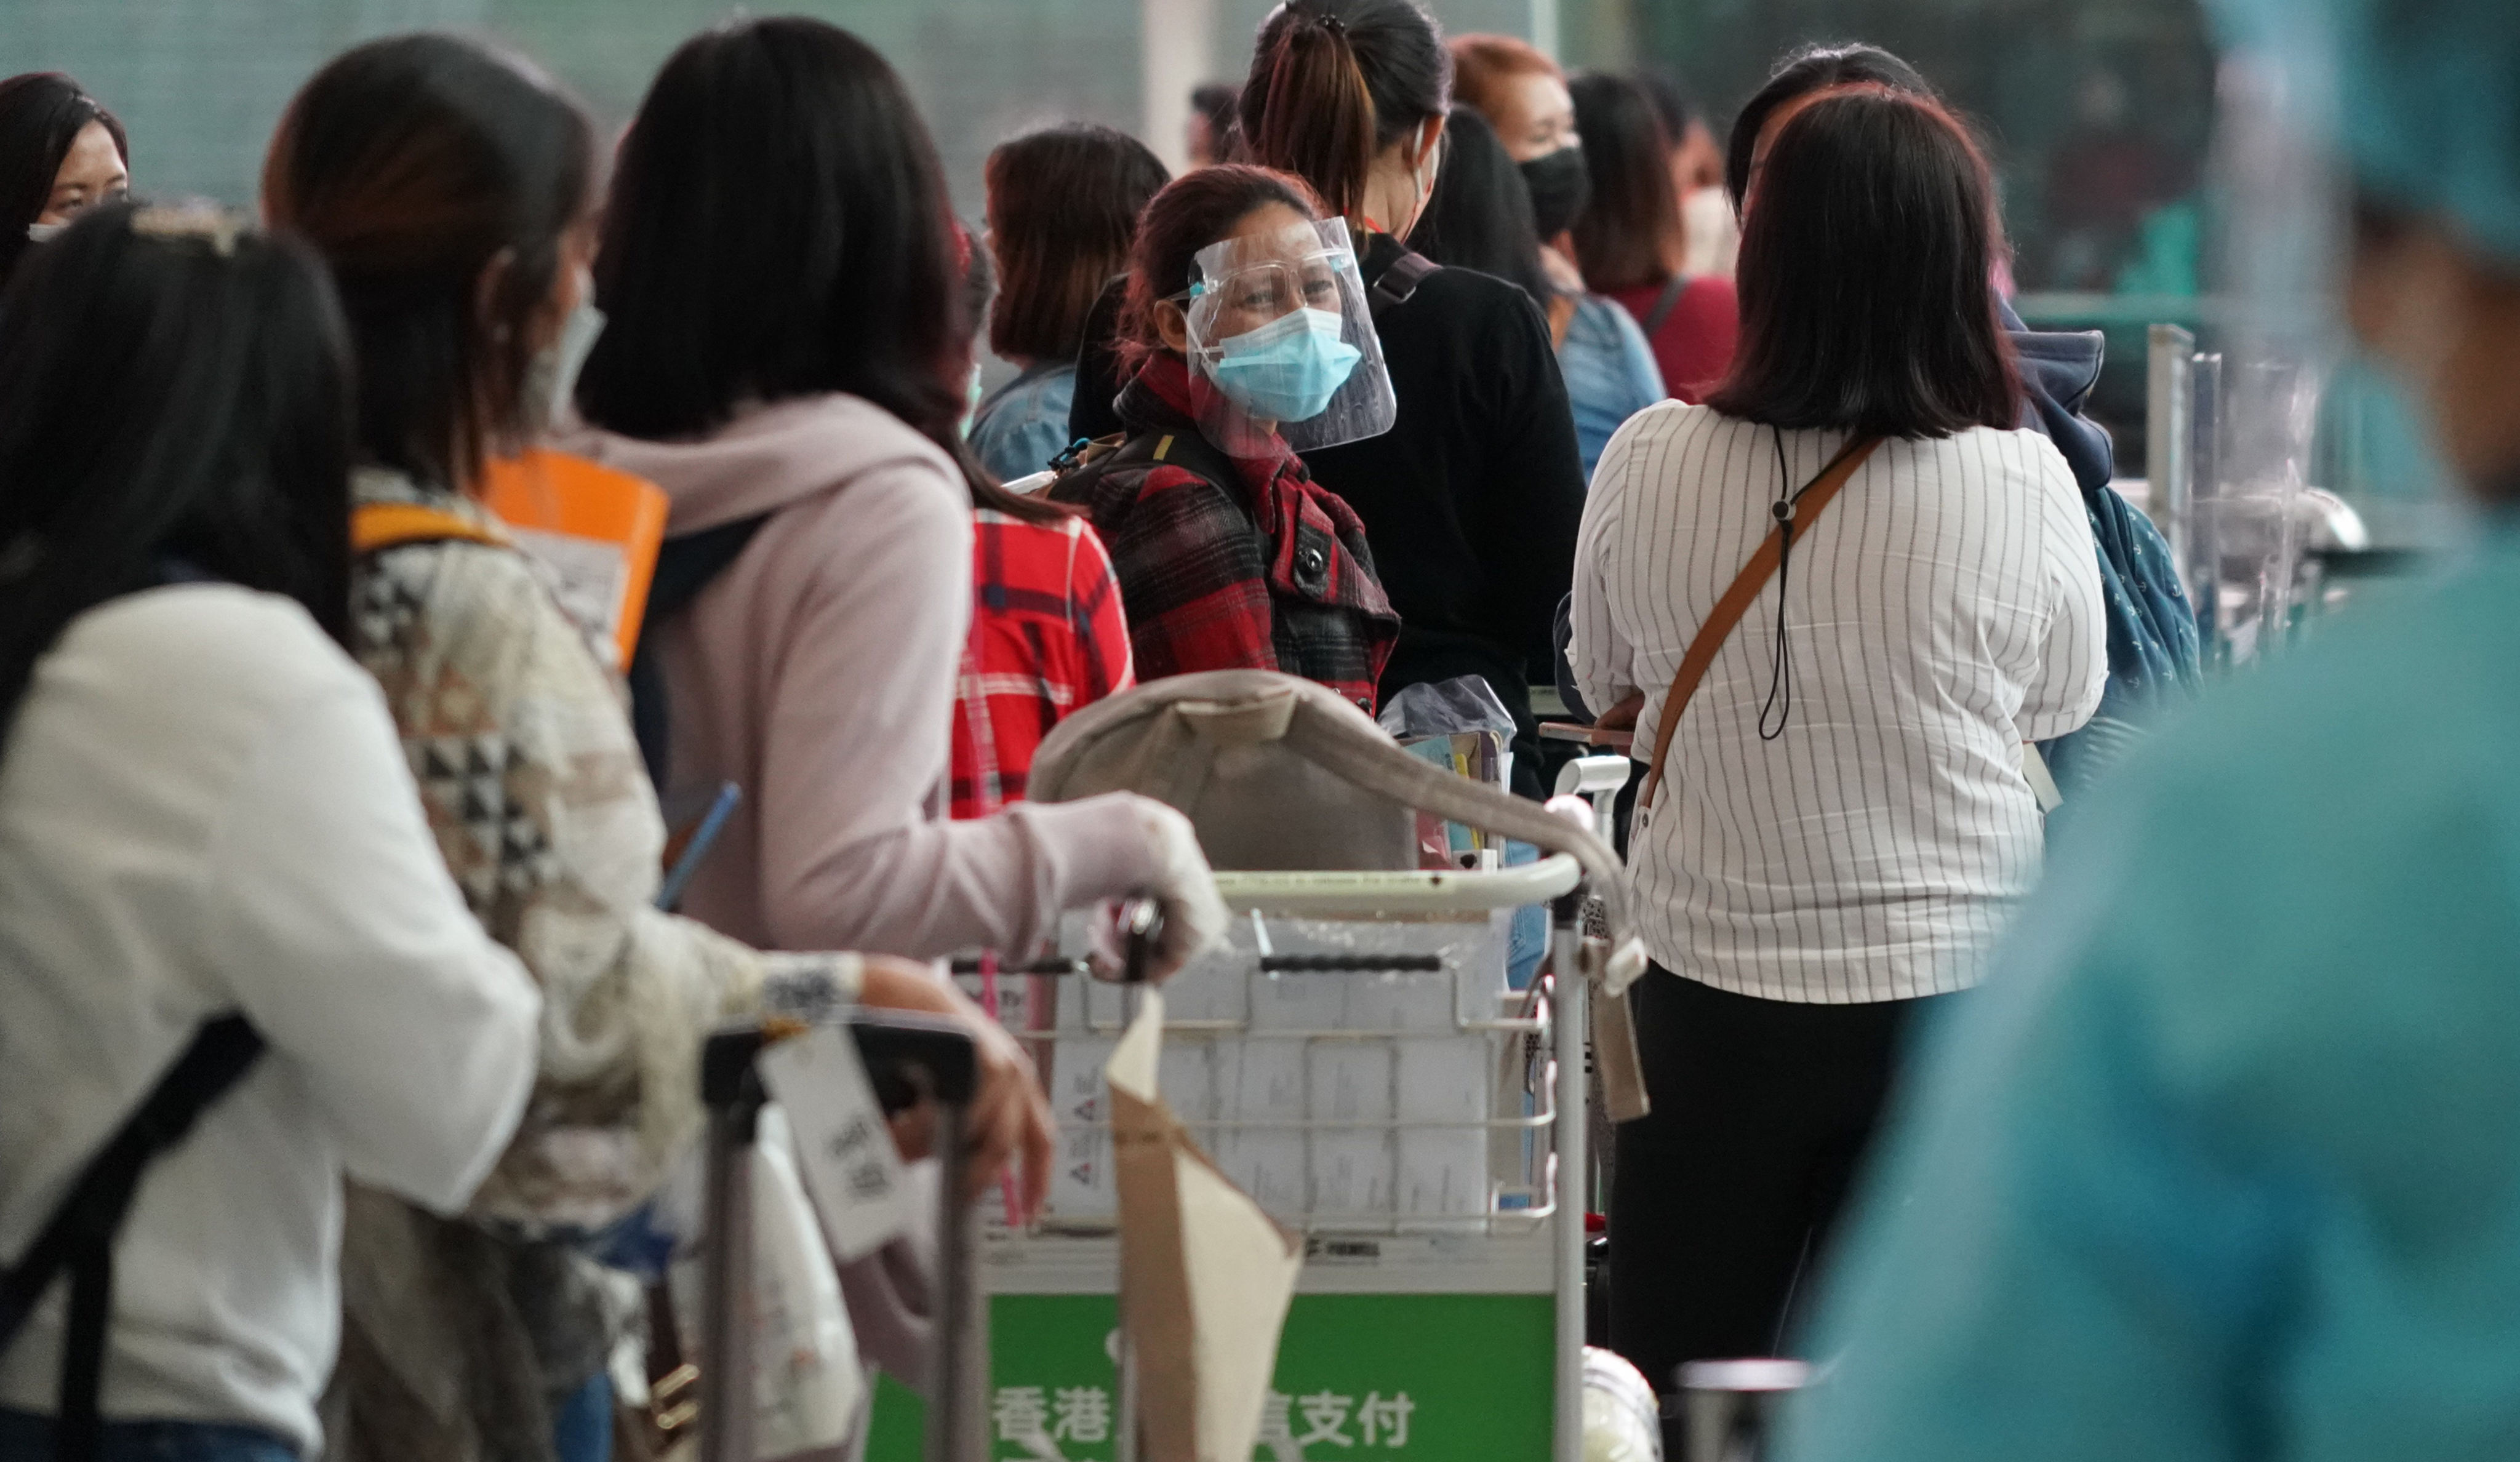 Hong Kong’s new quarantine measures means good and bad news for domestic helpers. Photo: Felix Wong